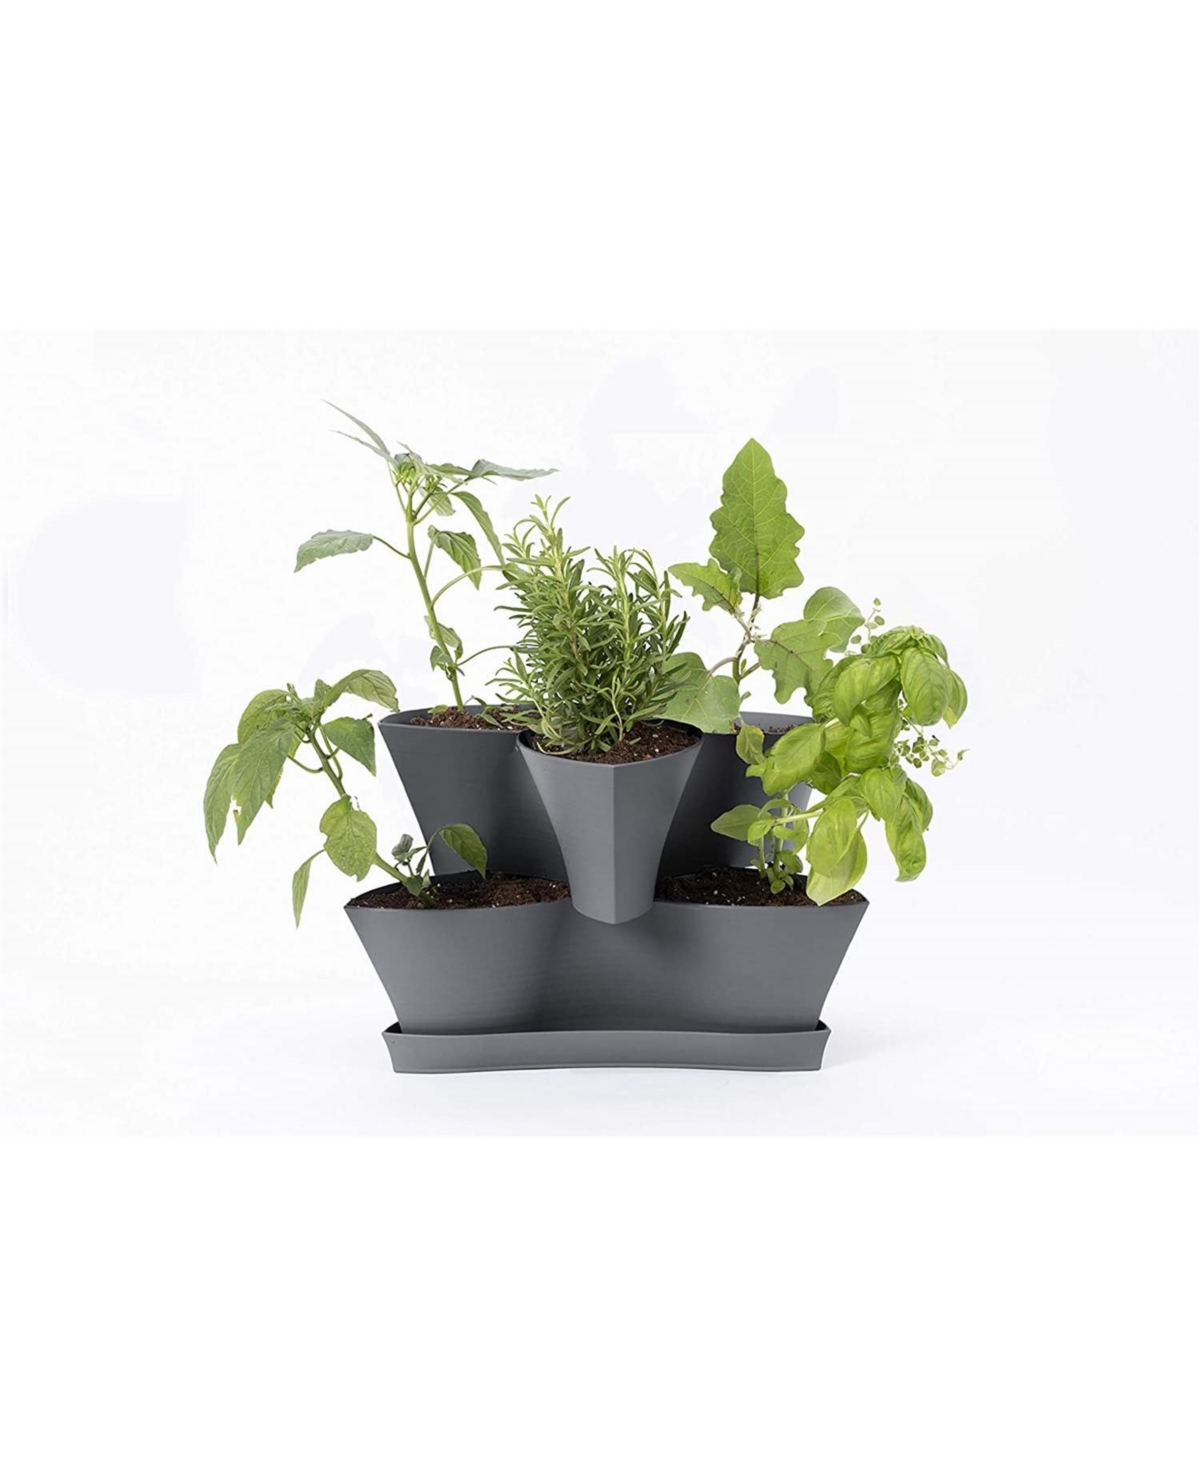 Collins Modular 2-Tier Multi-Level Vertical Herb Planter, Charcoal - Charcoal